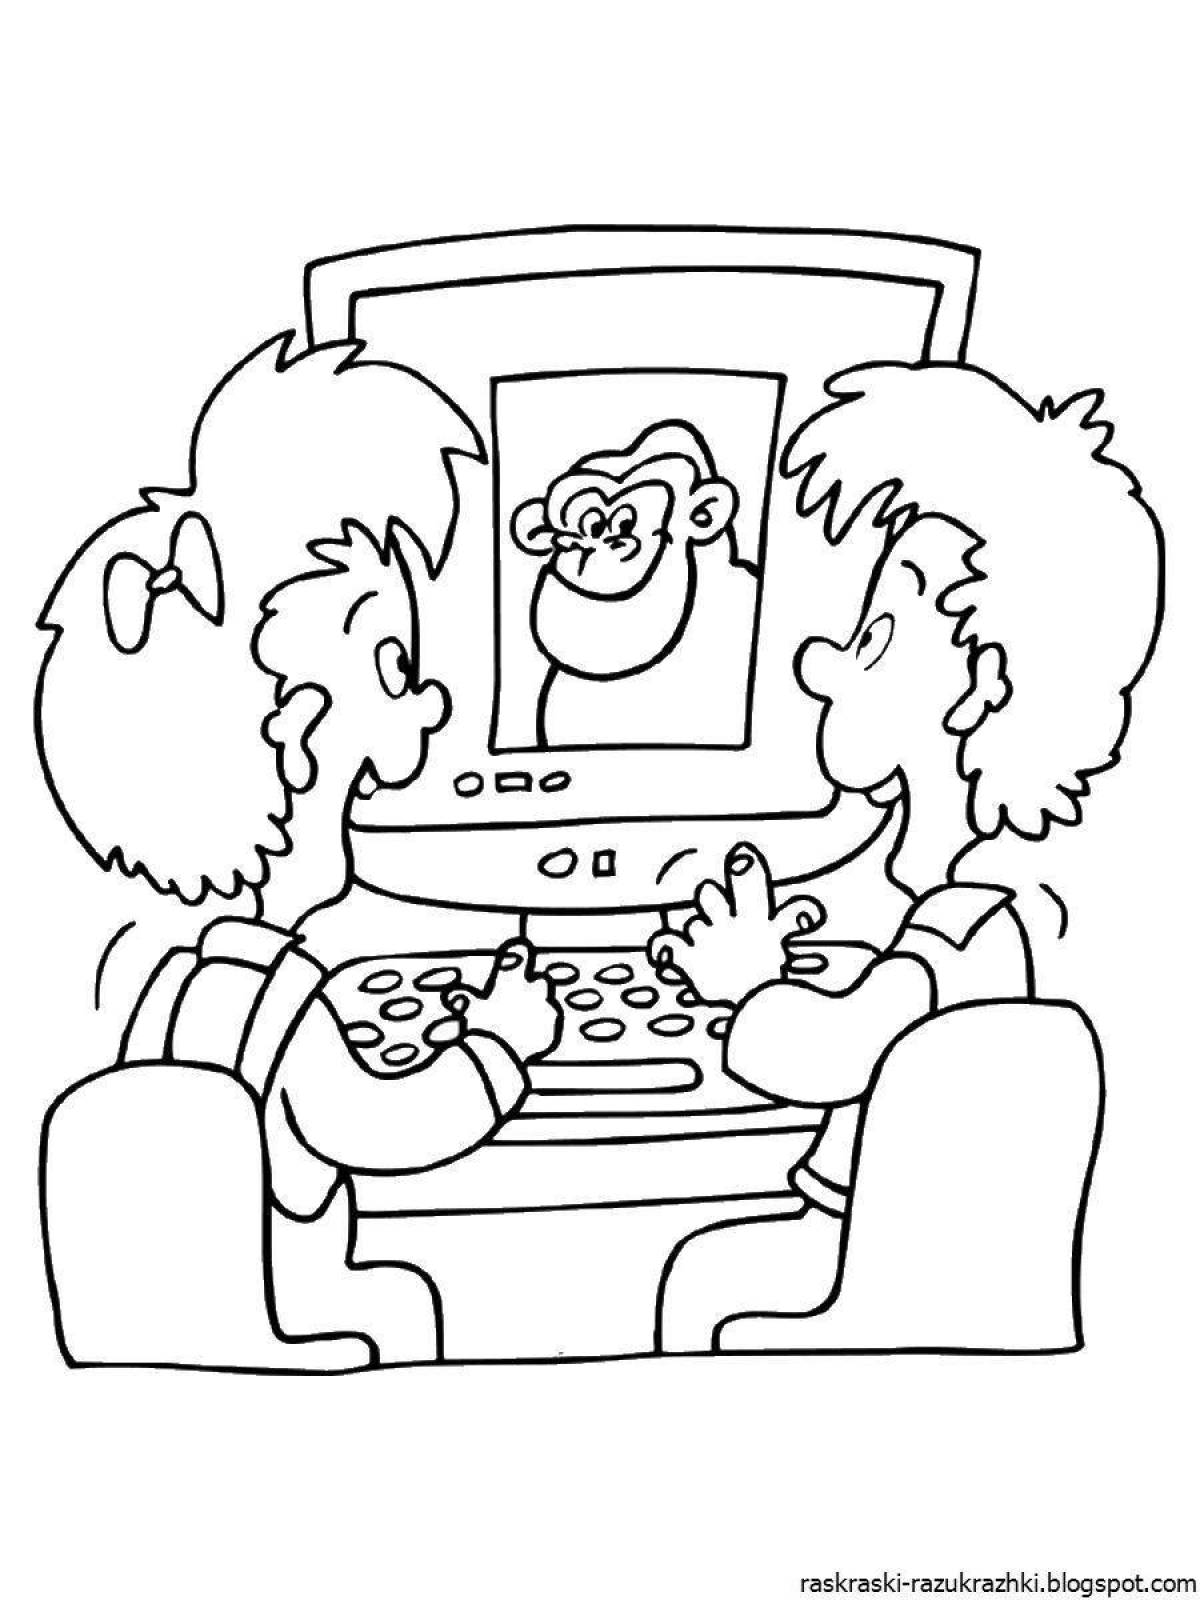 Fun safe internet coloring page for kids